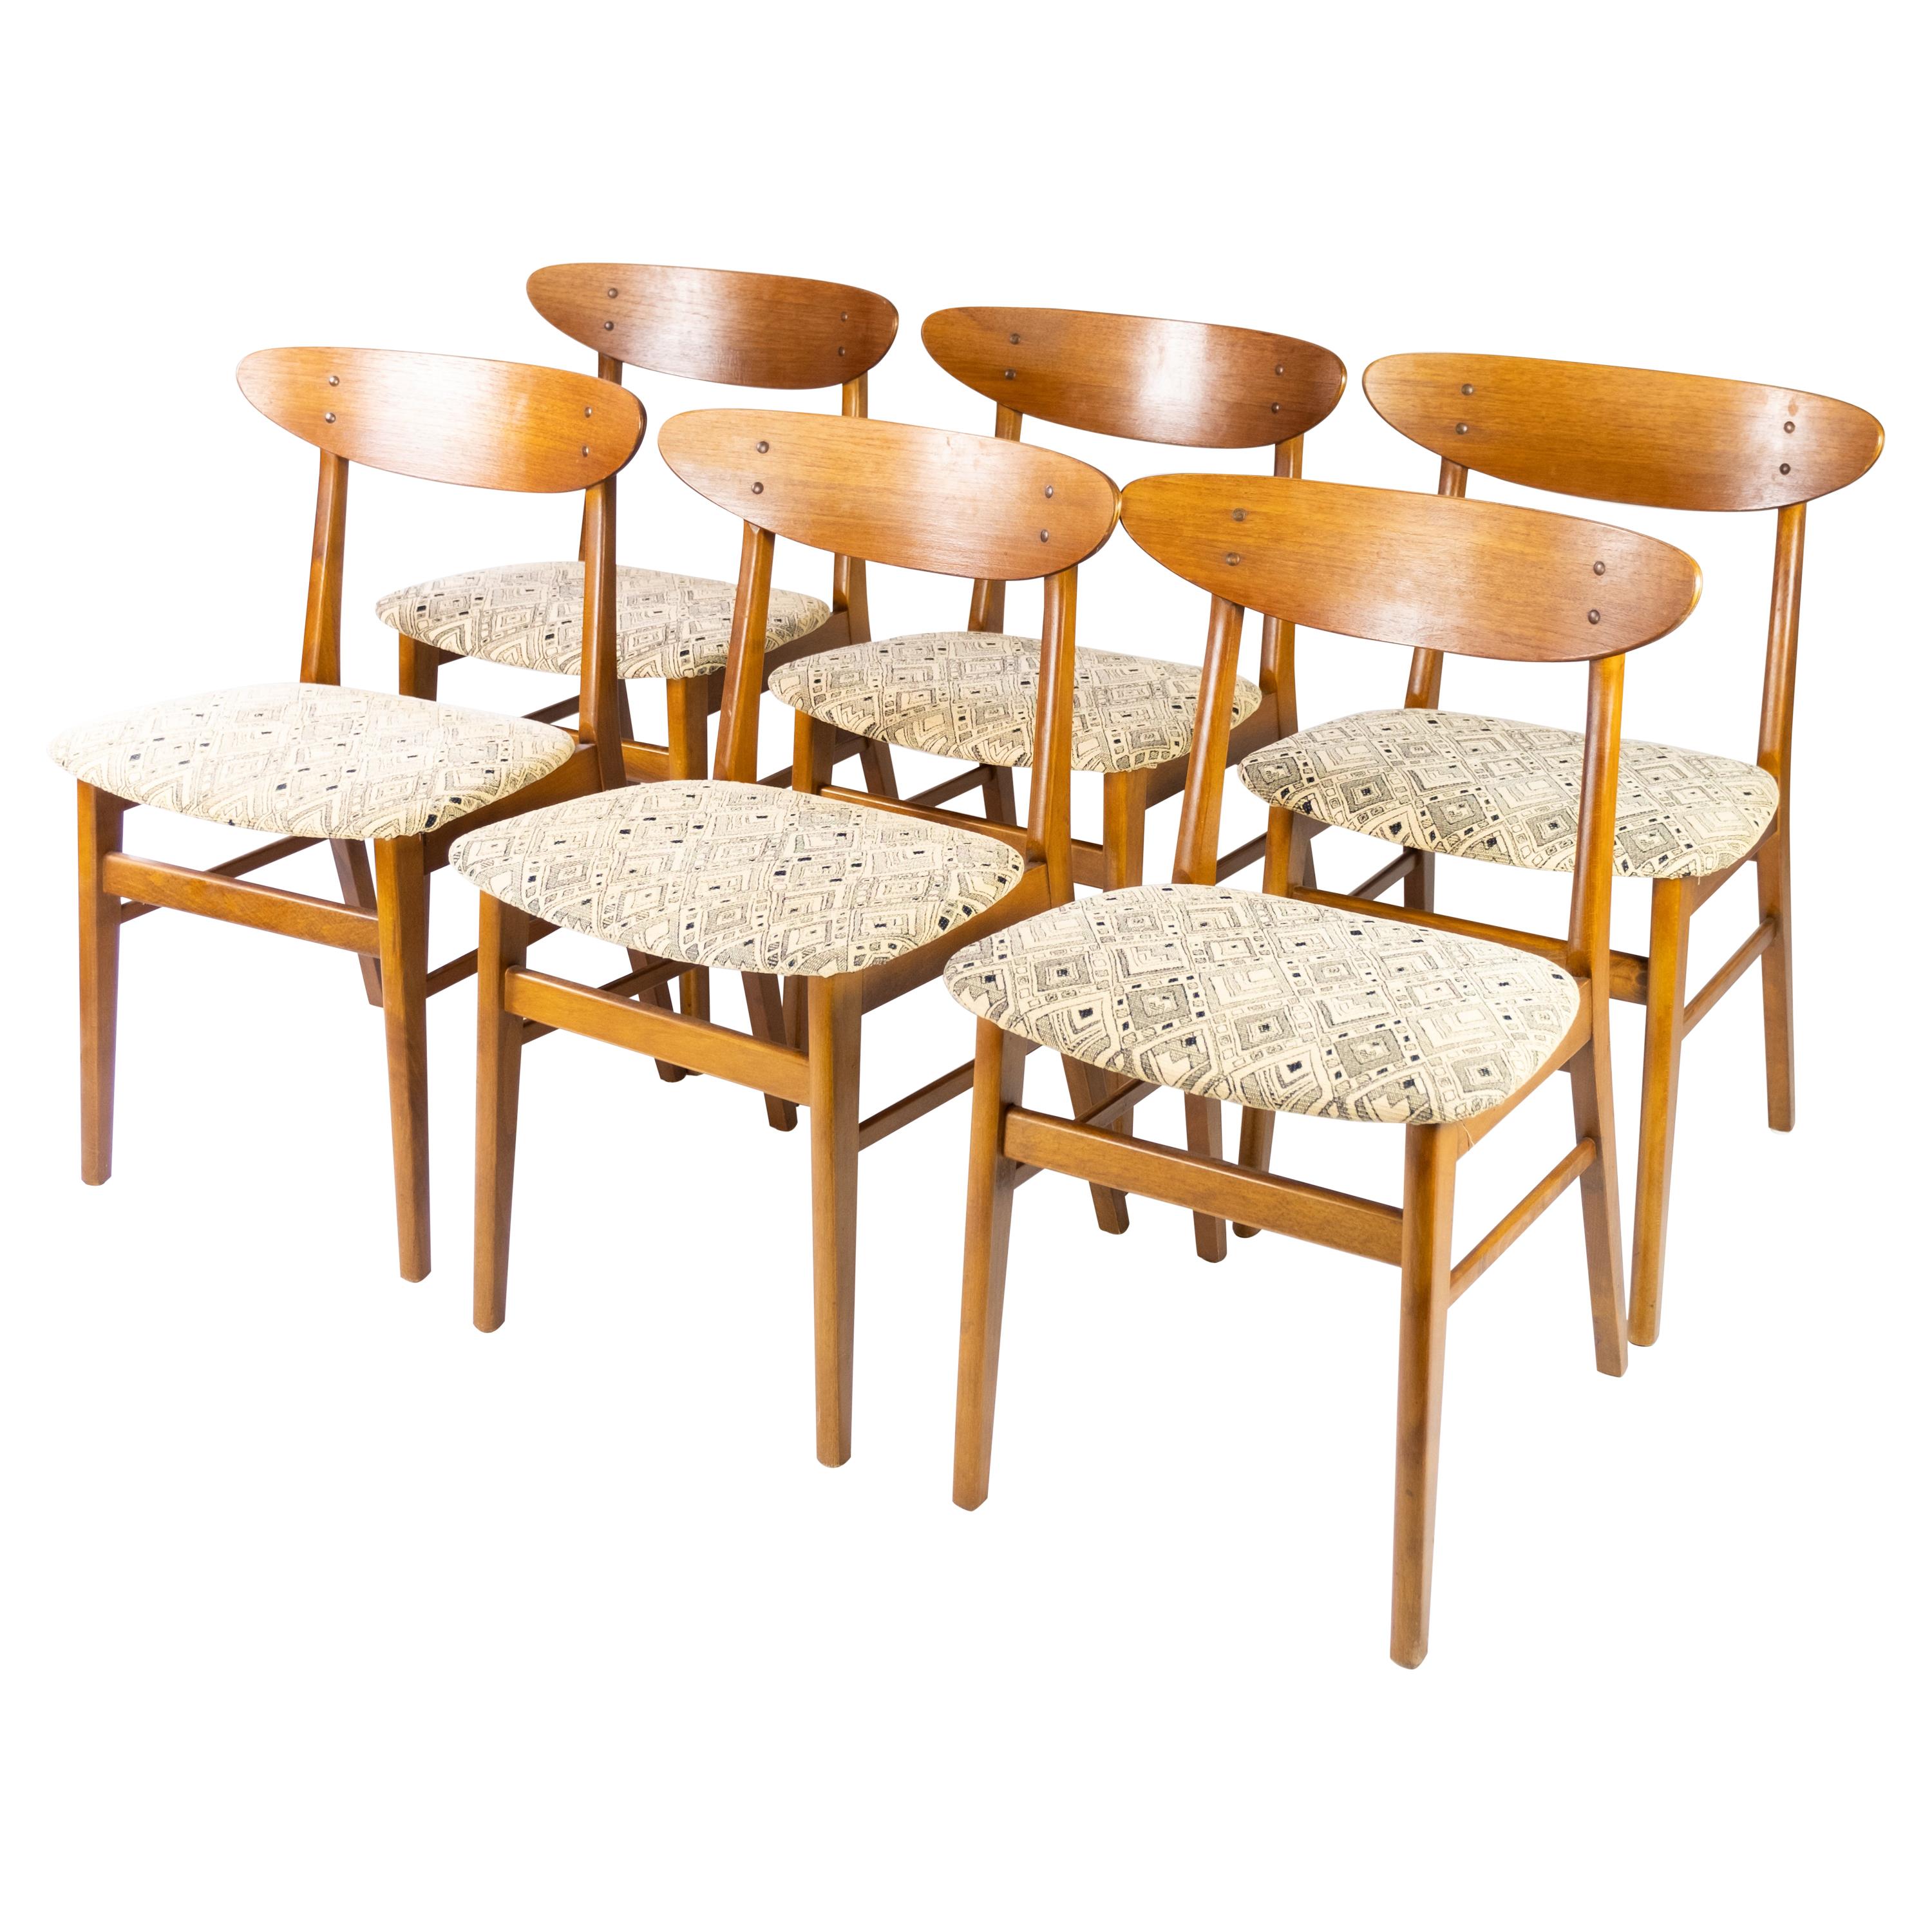 Scandinavian Modern Set of Six Dining Room Chairs in Teak from the 1960s